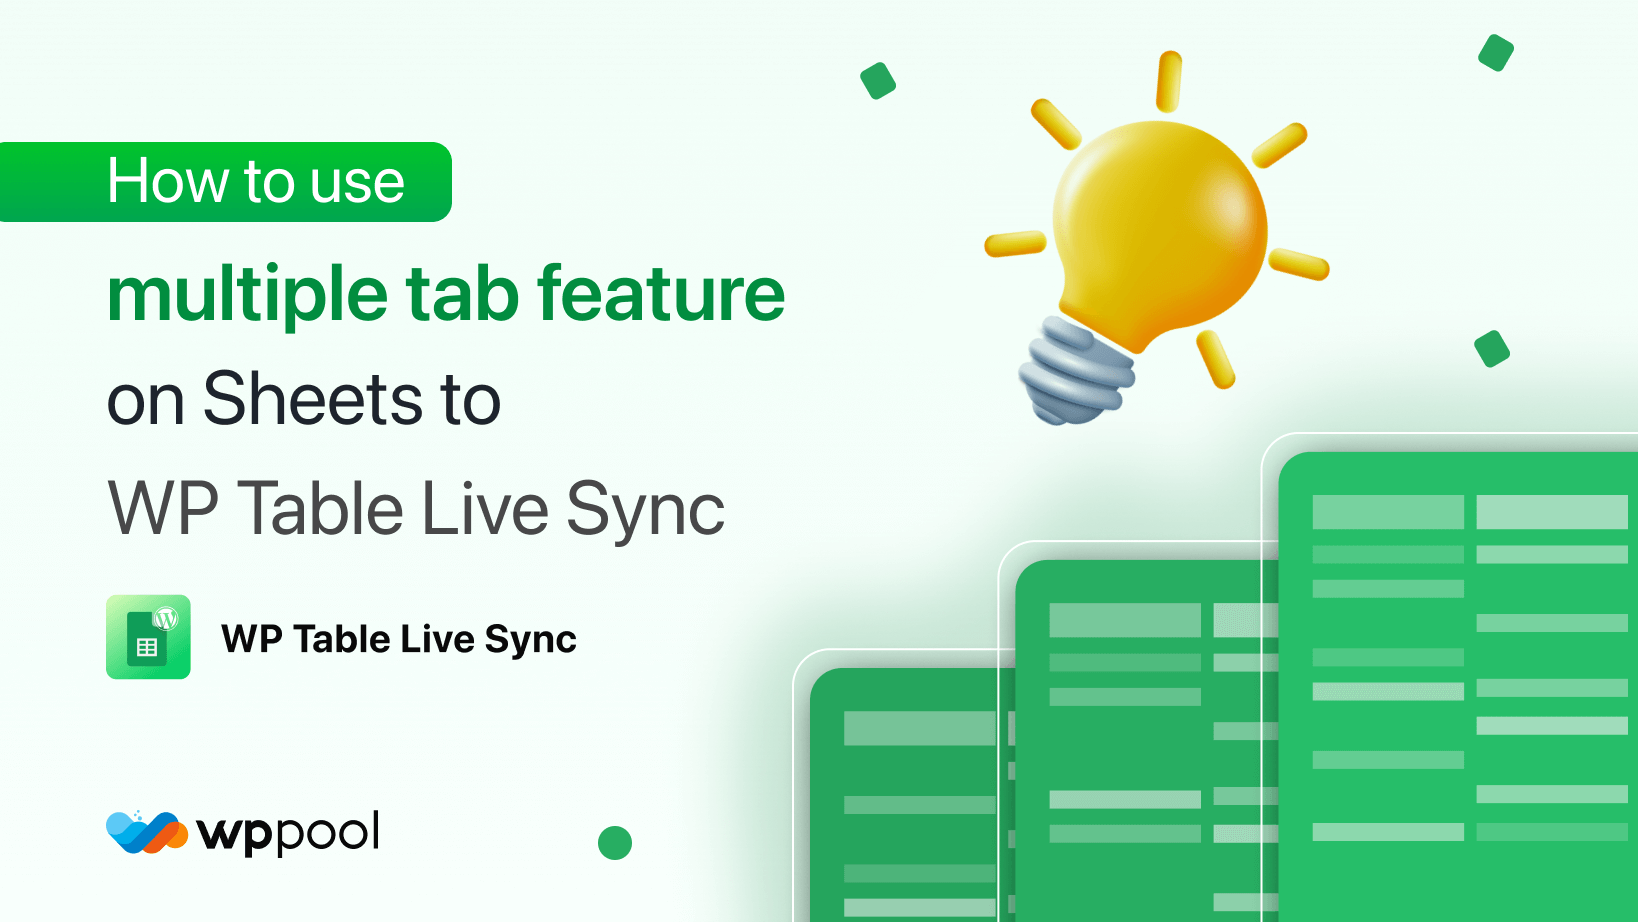 How to use multiple tab feature on Google Sheets to WP Table Live Sync